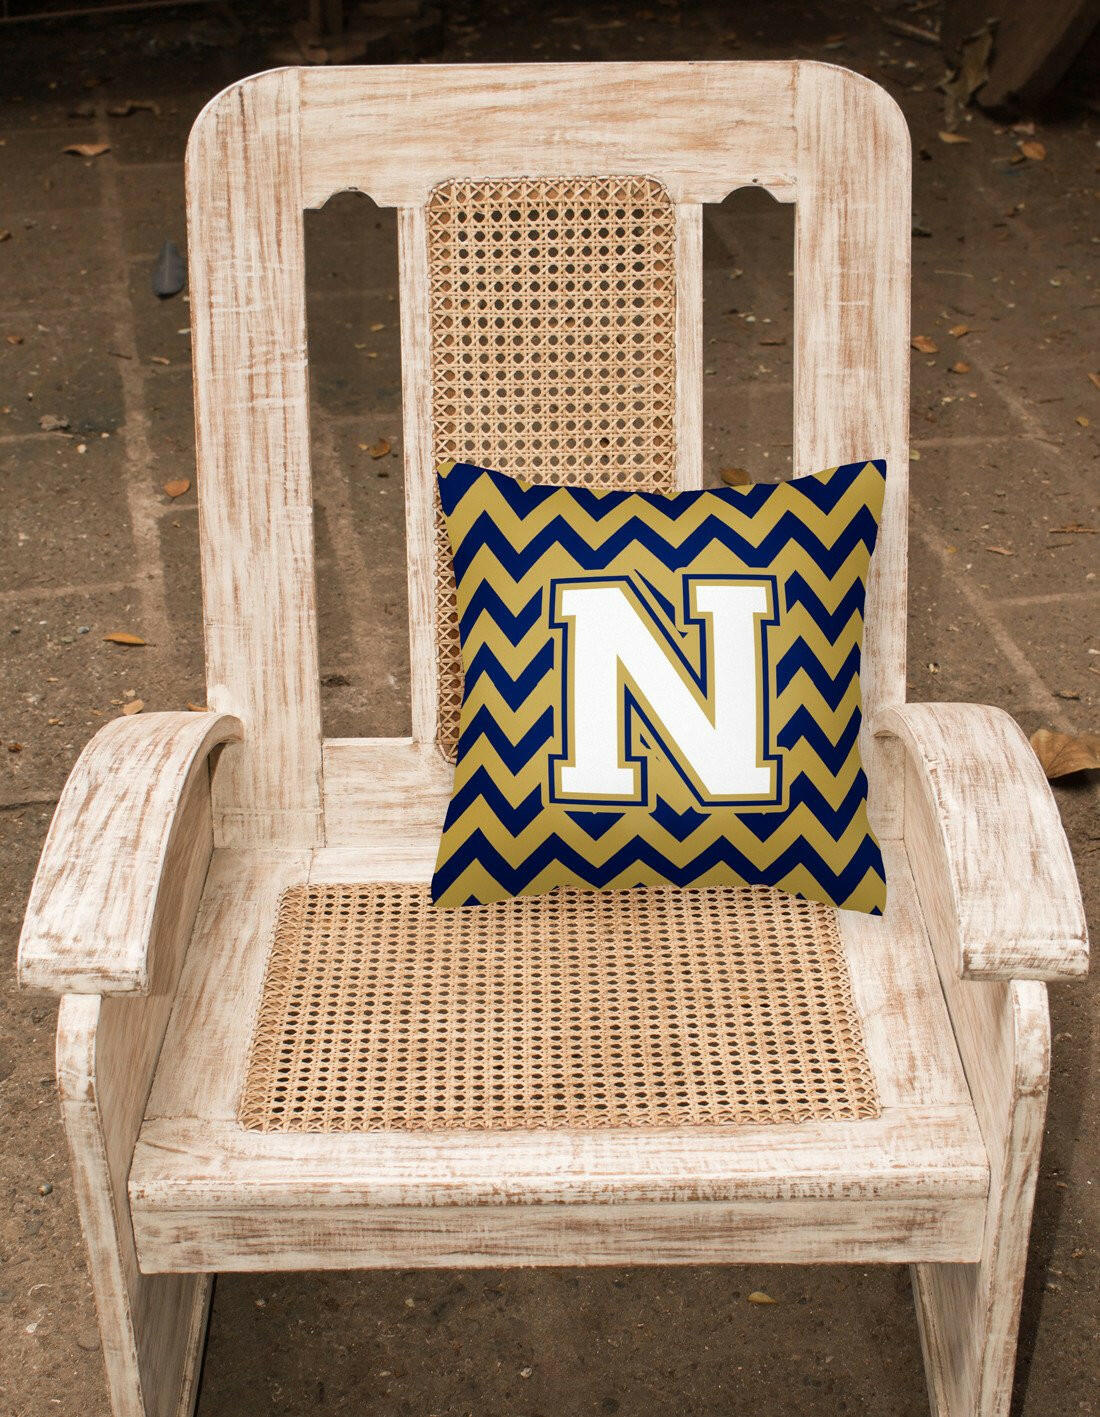 Letter N Chevron Navy Blue and Gold Fabric Decorative Pillow CJ1057-NPW1414 by Caroline's Treasures